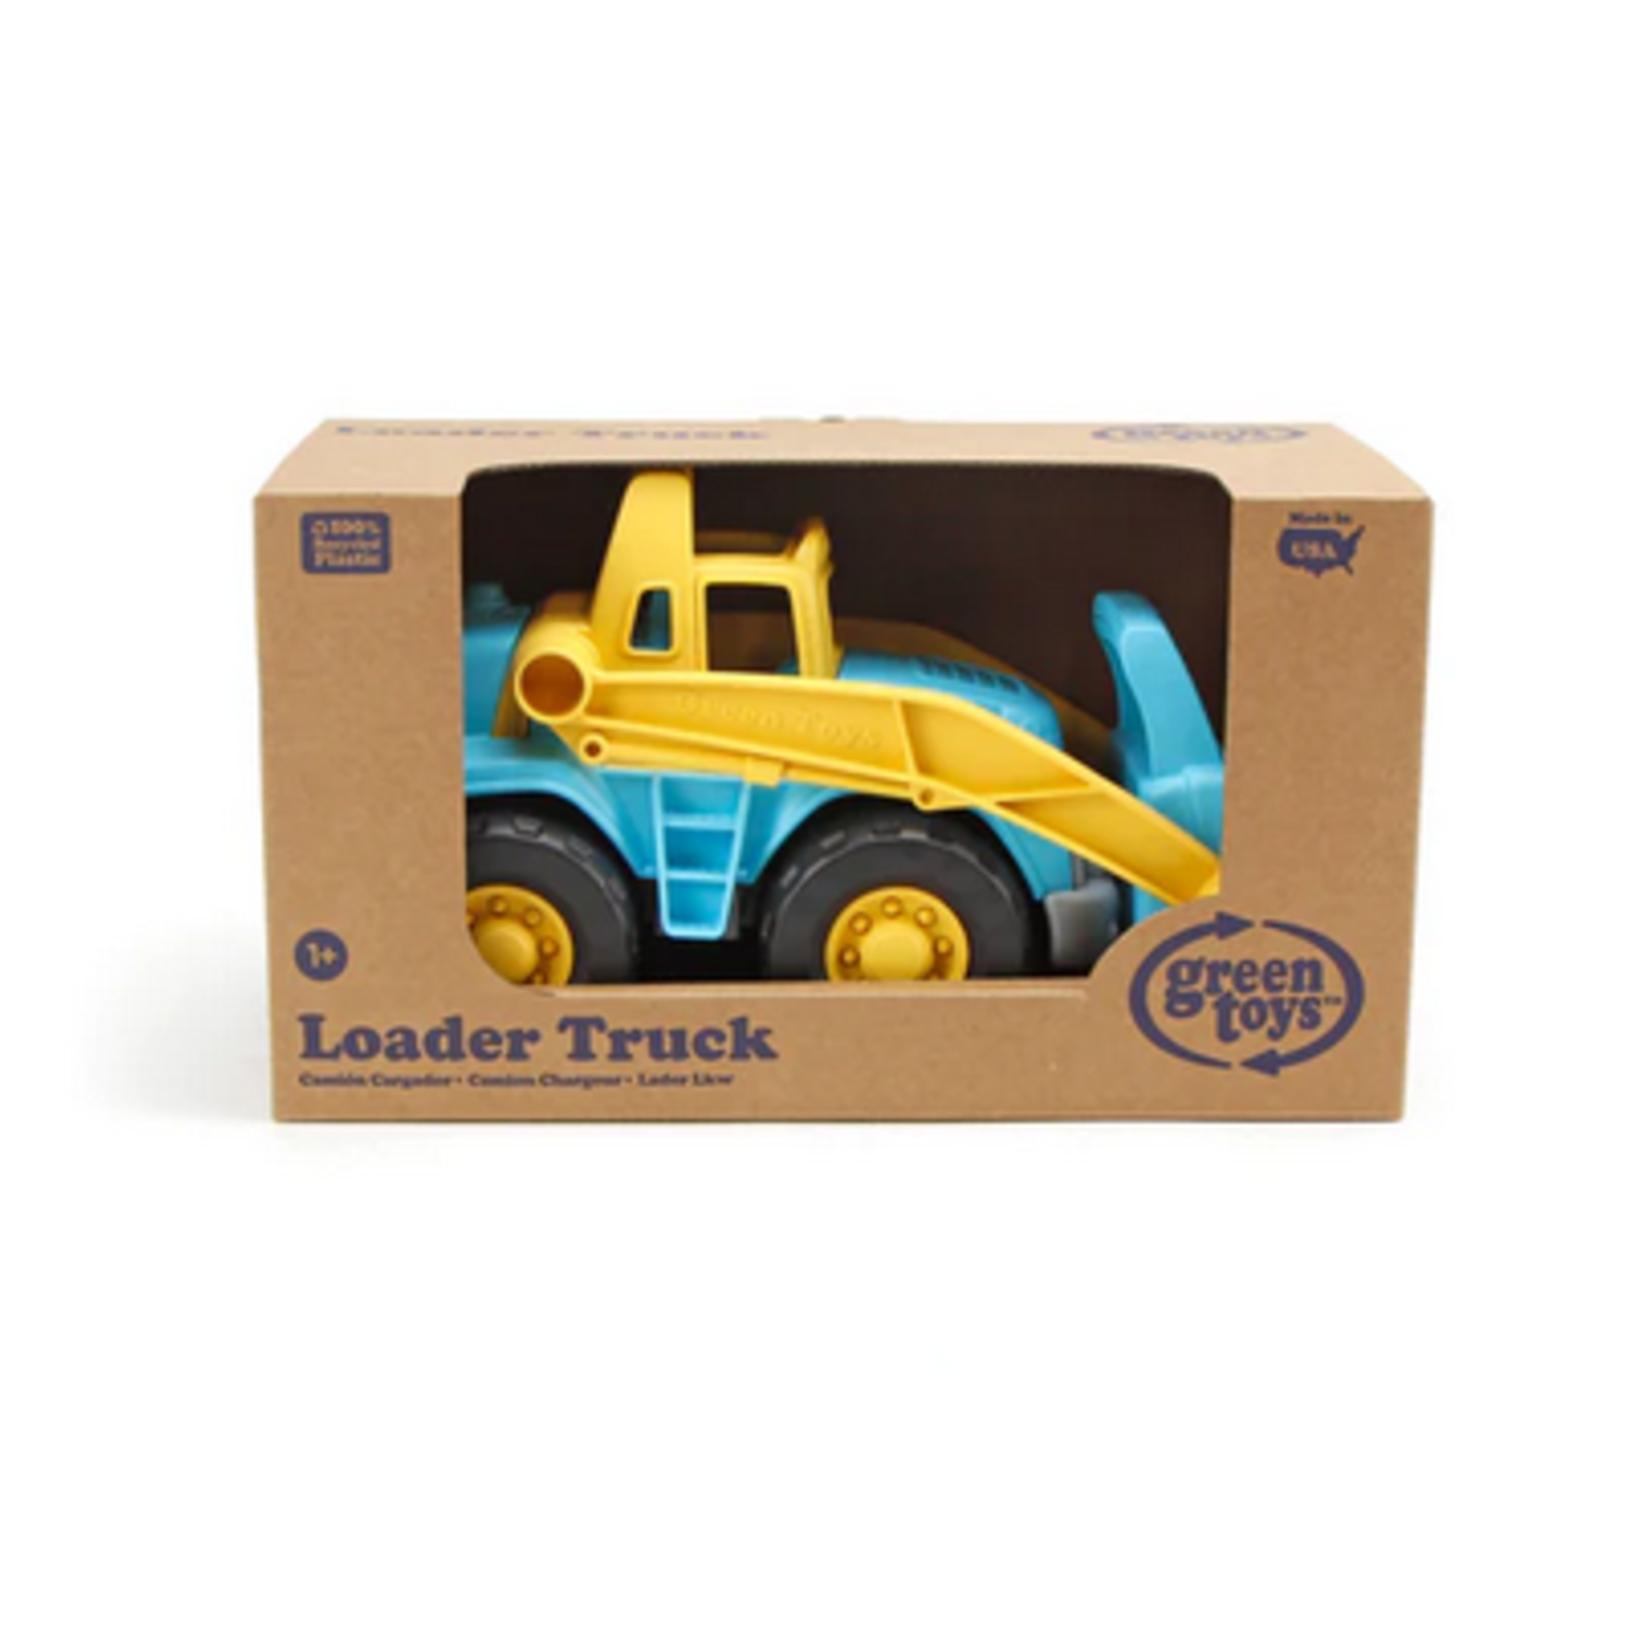 Green Toys GREEN TOYS LOADER TRUCK